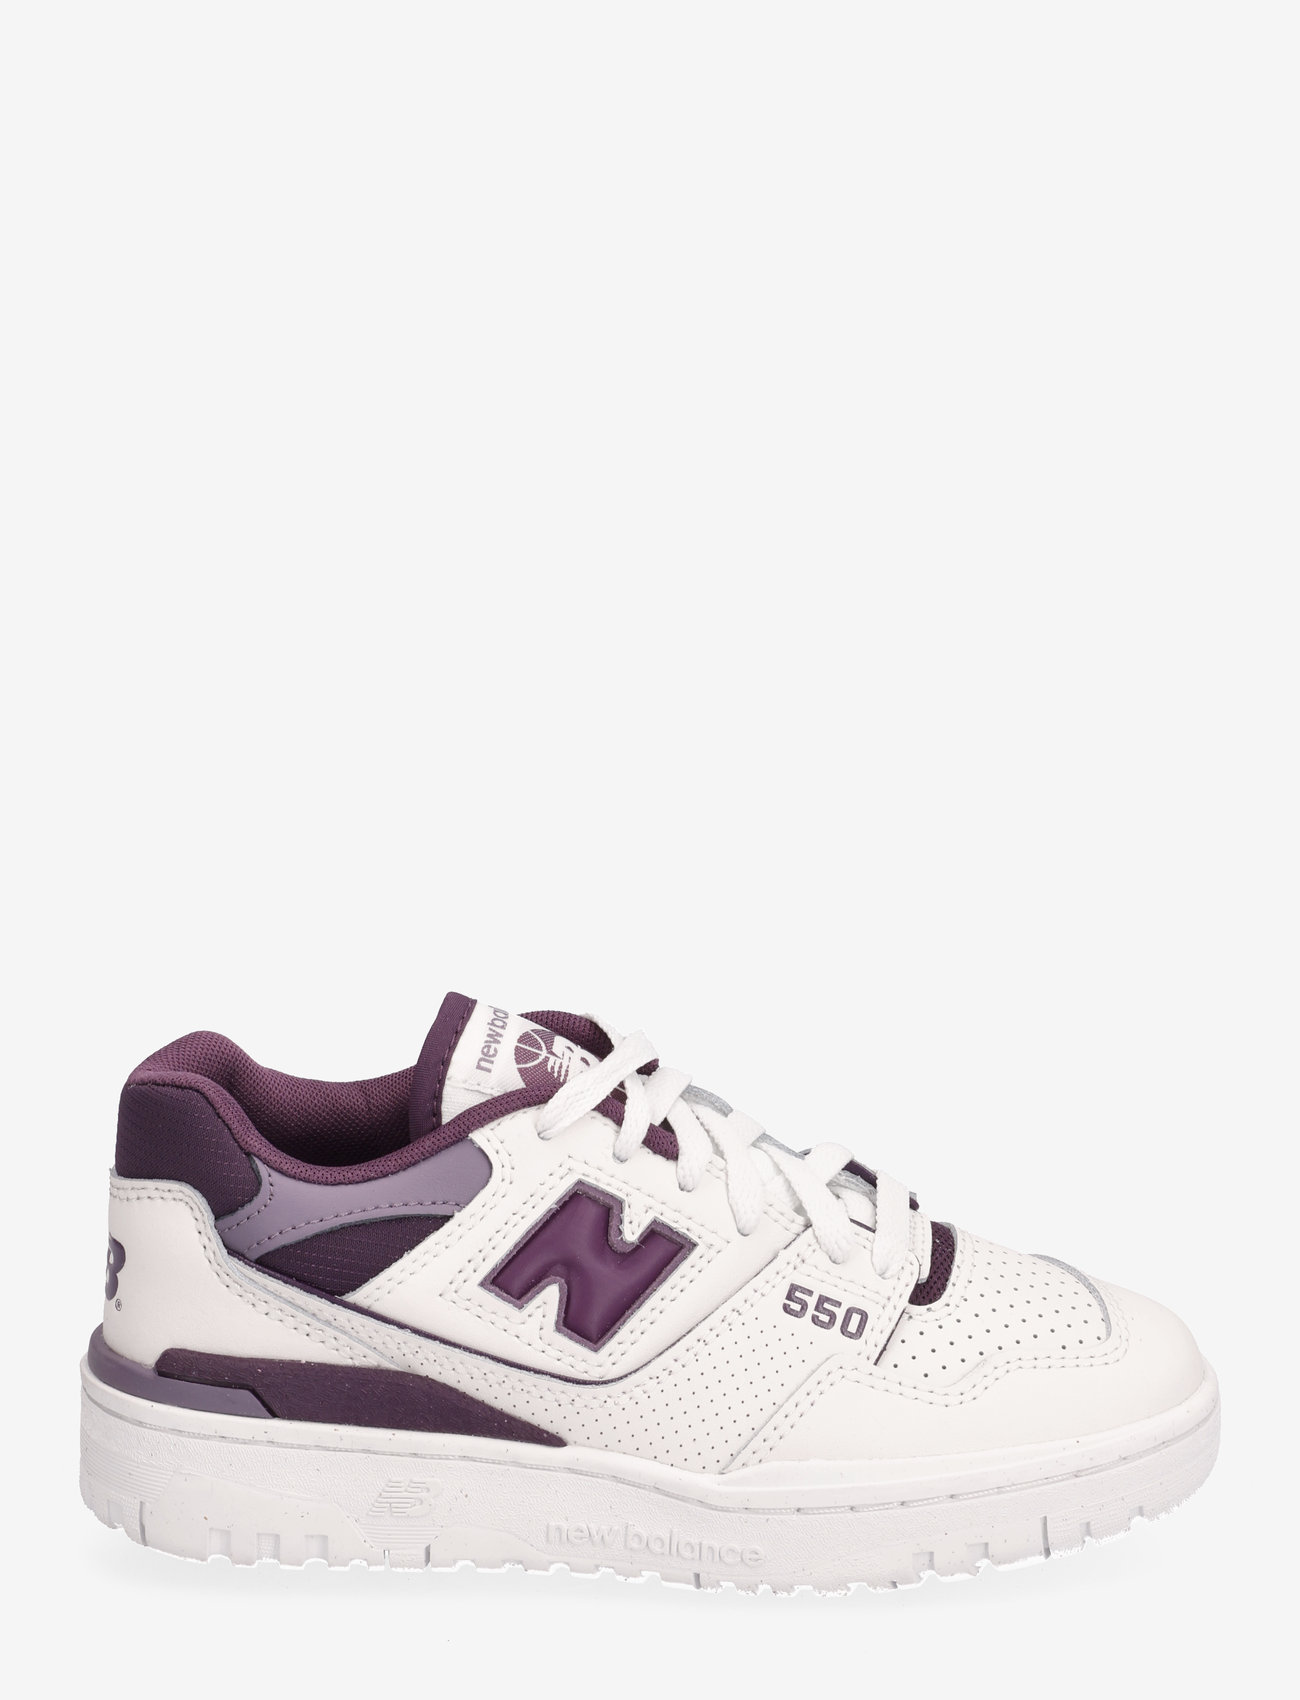 New Balance - New Balance BBW550 - low top sneakers - reflection - 1